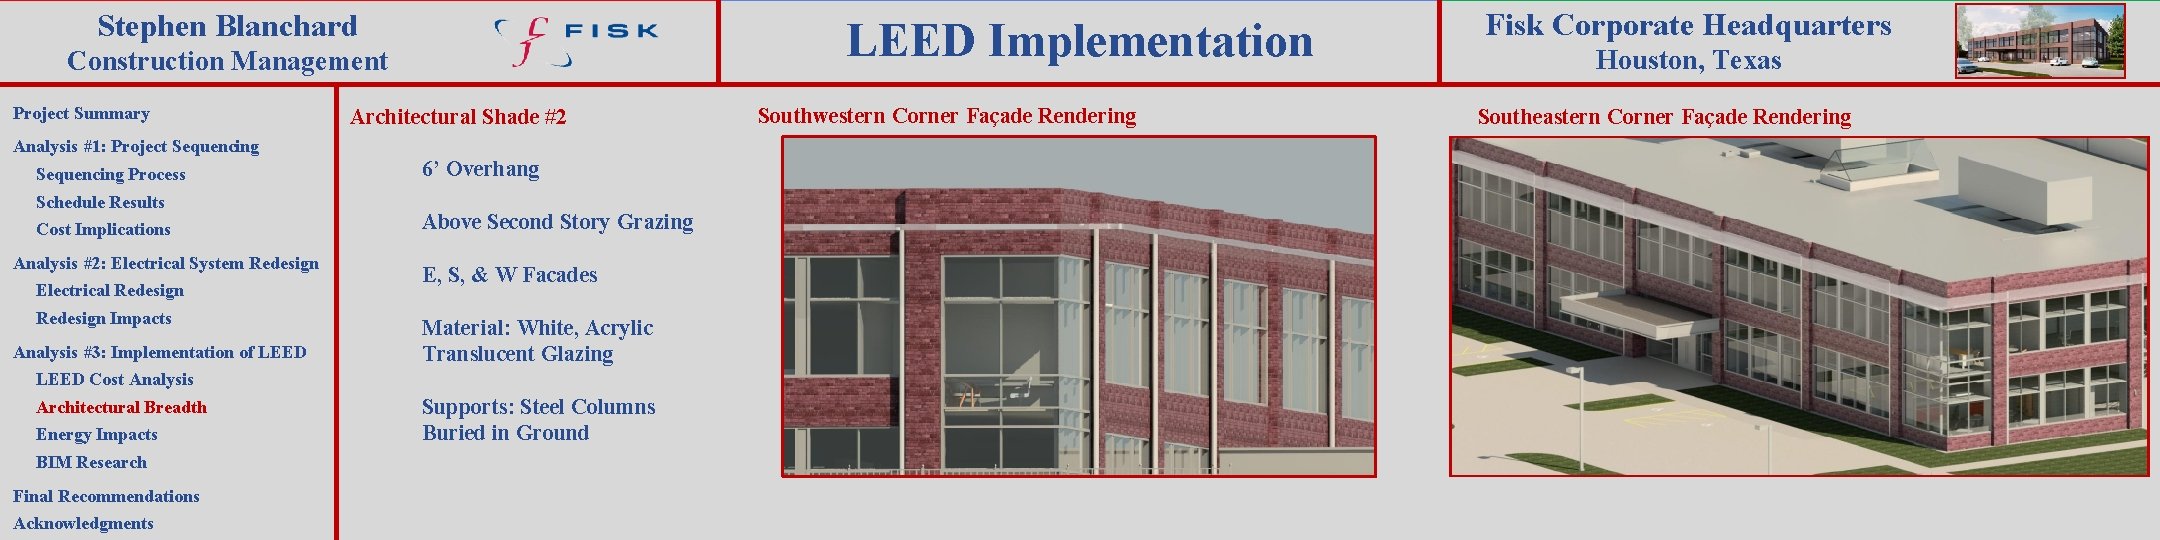 Stephen Blanchard LEED Implementation Construction Management Project Summary Architectural Shade #2 Analysis #1: Project